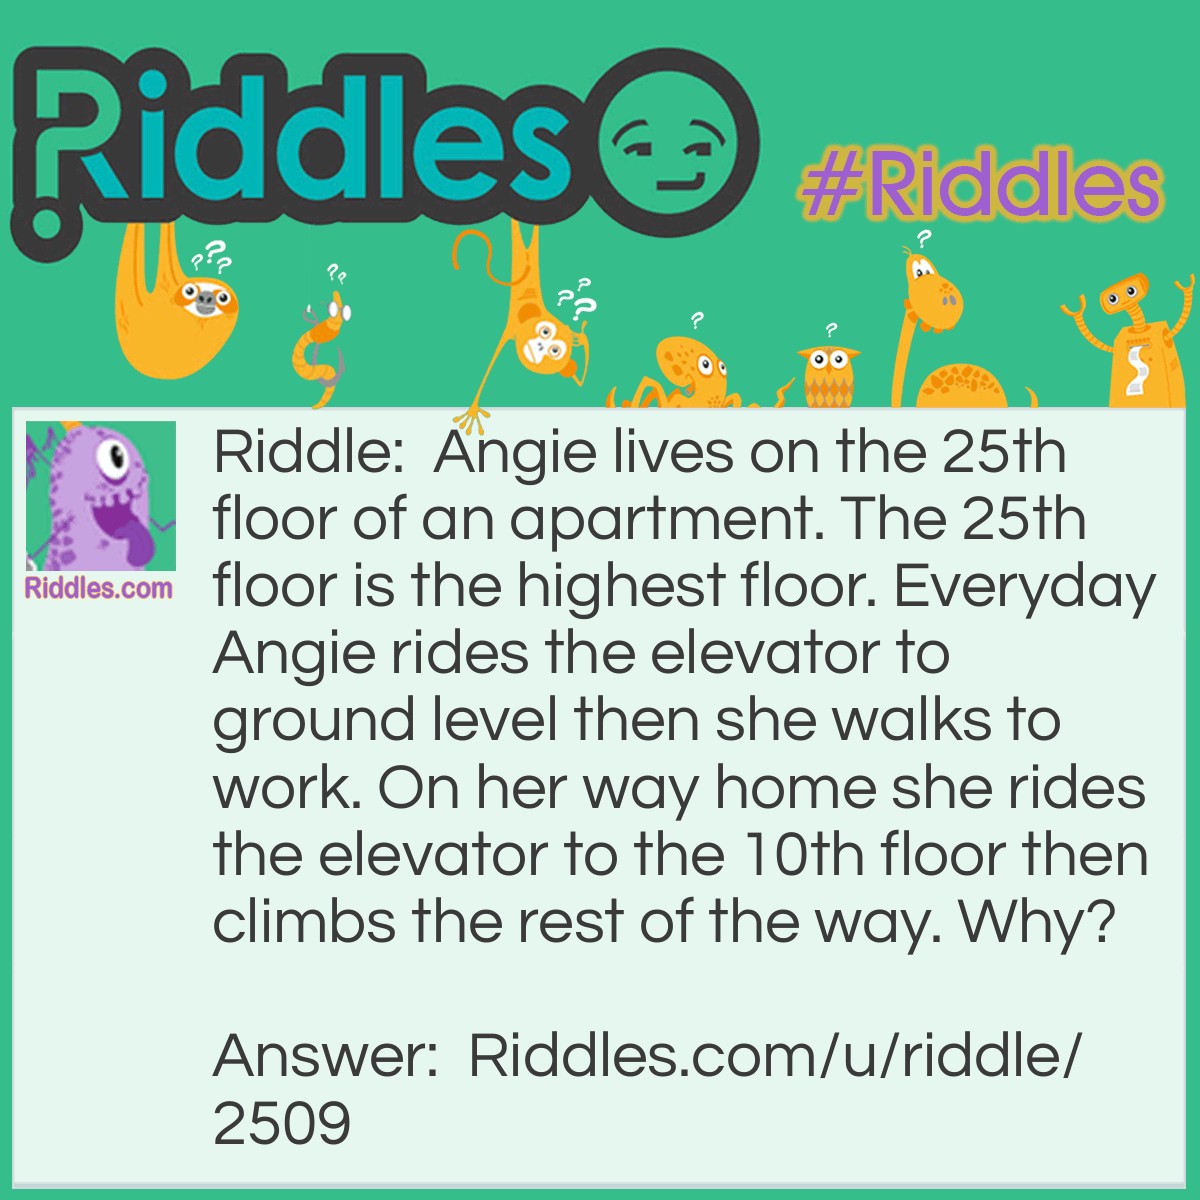 Riddle: Angie lives on the 25th floor of an apartment. The 25th floor is the highest floor. Everyday Angie rides the elevator to ground level then she walks to work. On her way home she rides the elevator to the 10th floor then climbs the rest of the way. Why? Answer: She is a midgit and can only reach the 10th button.